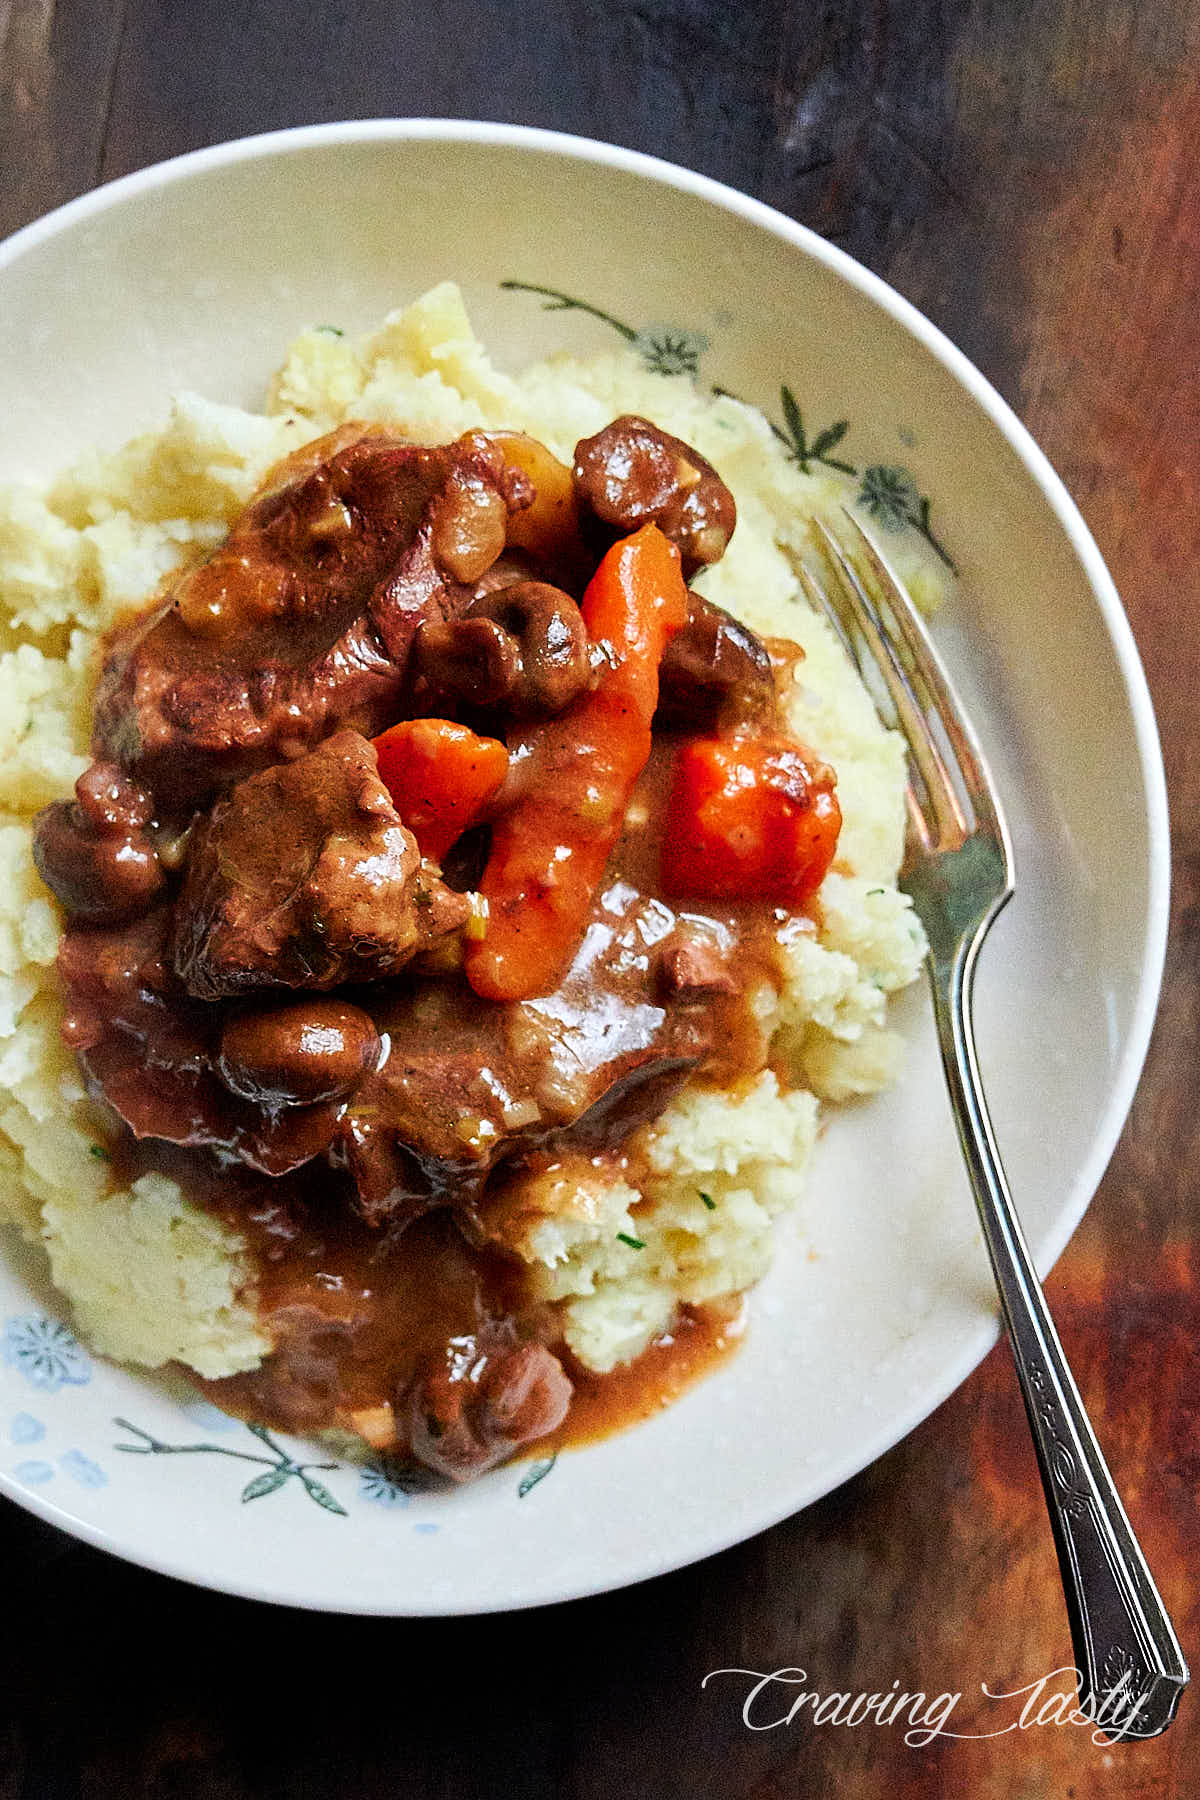 Braised beef over mashed potatoes in a white bowl.